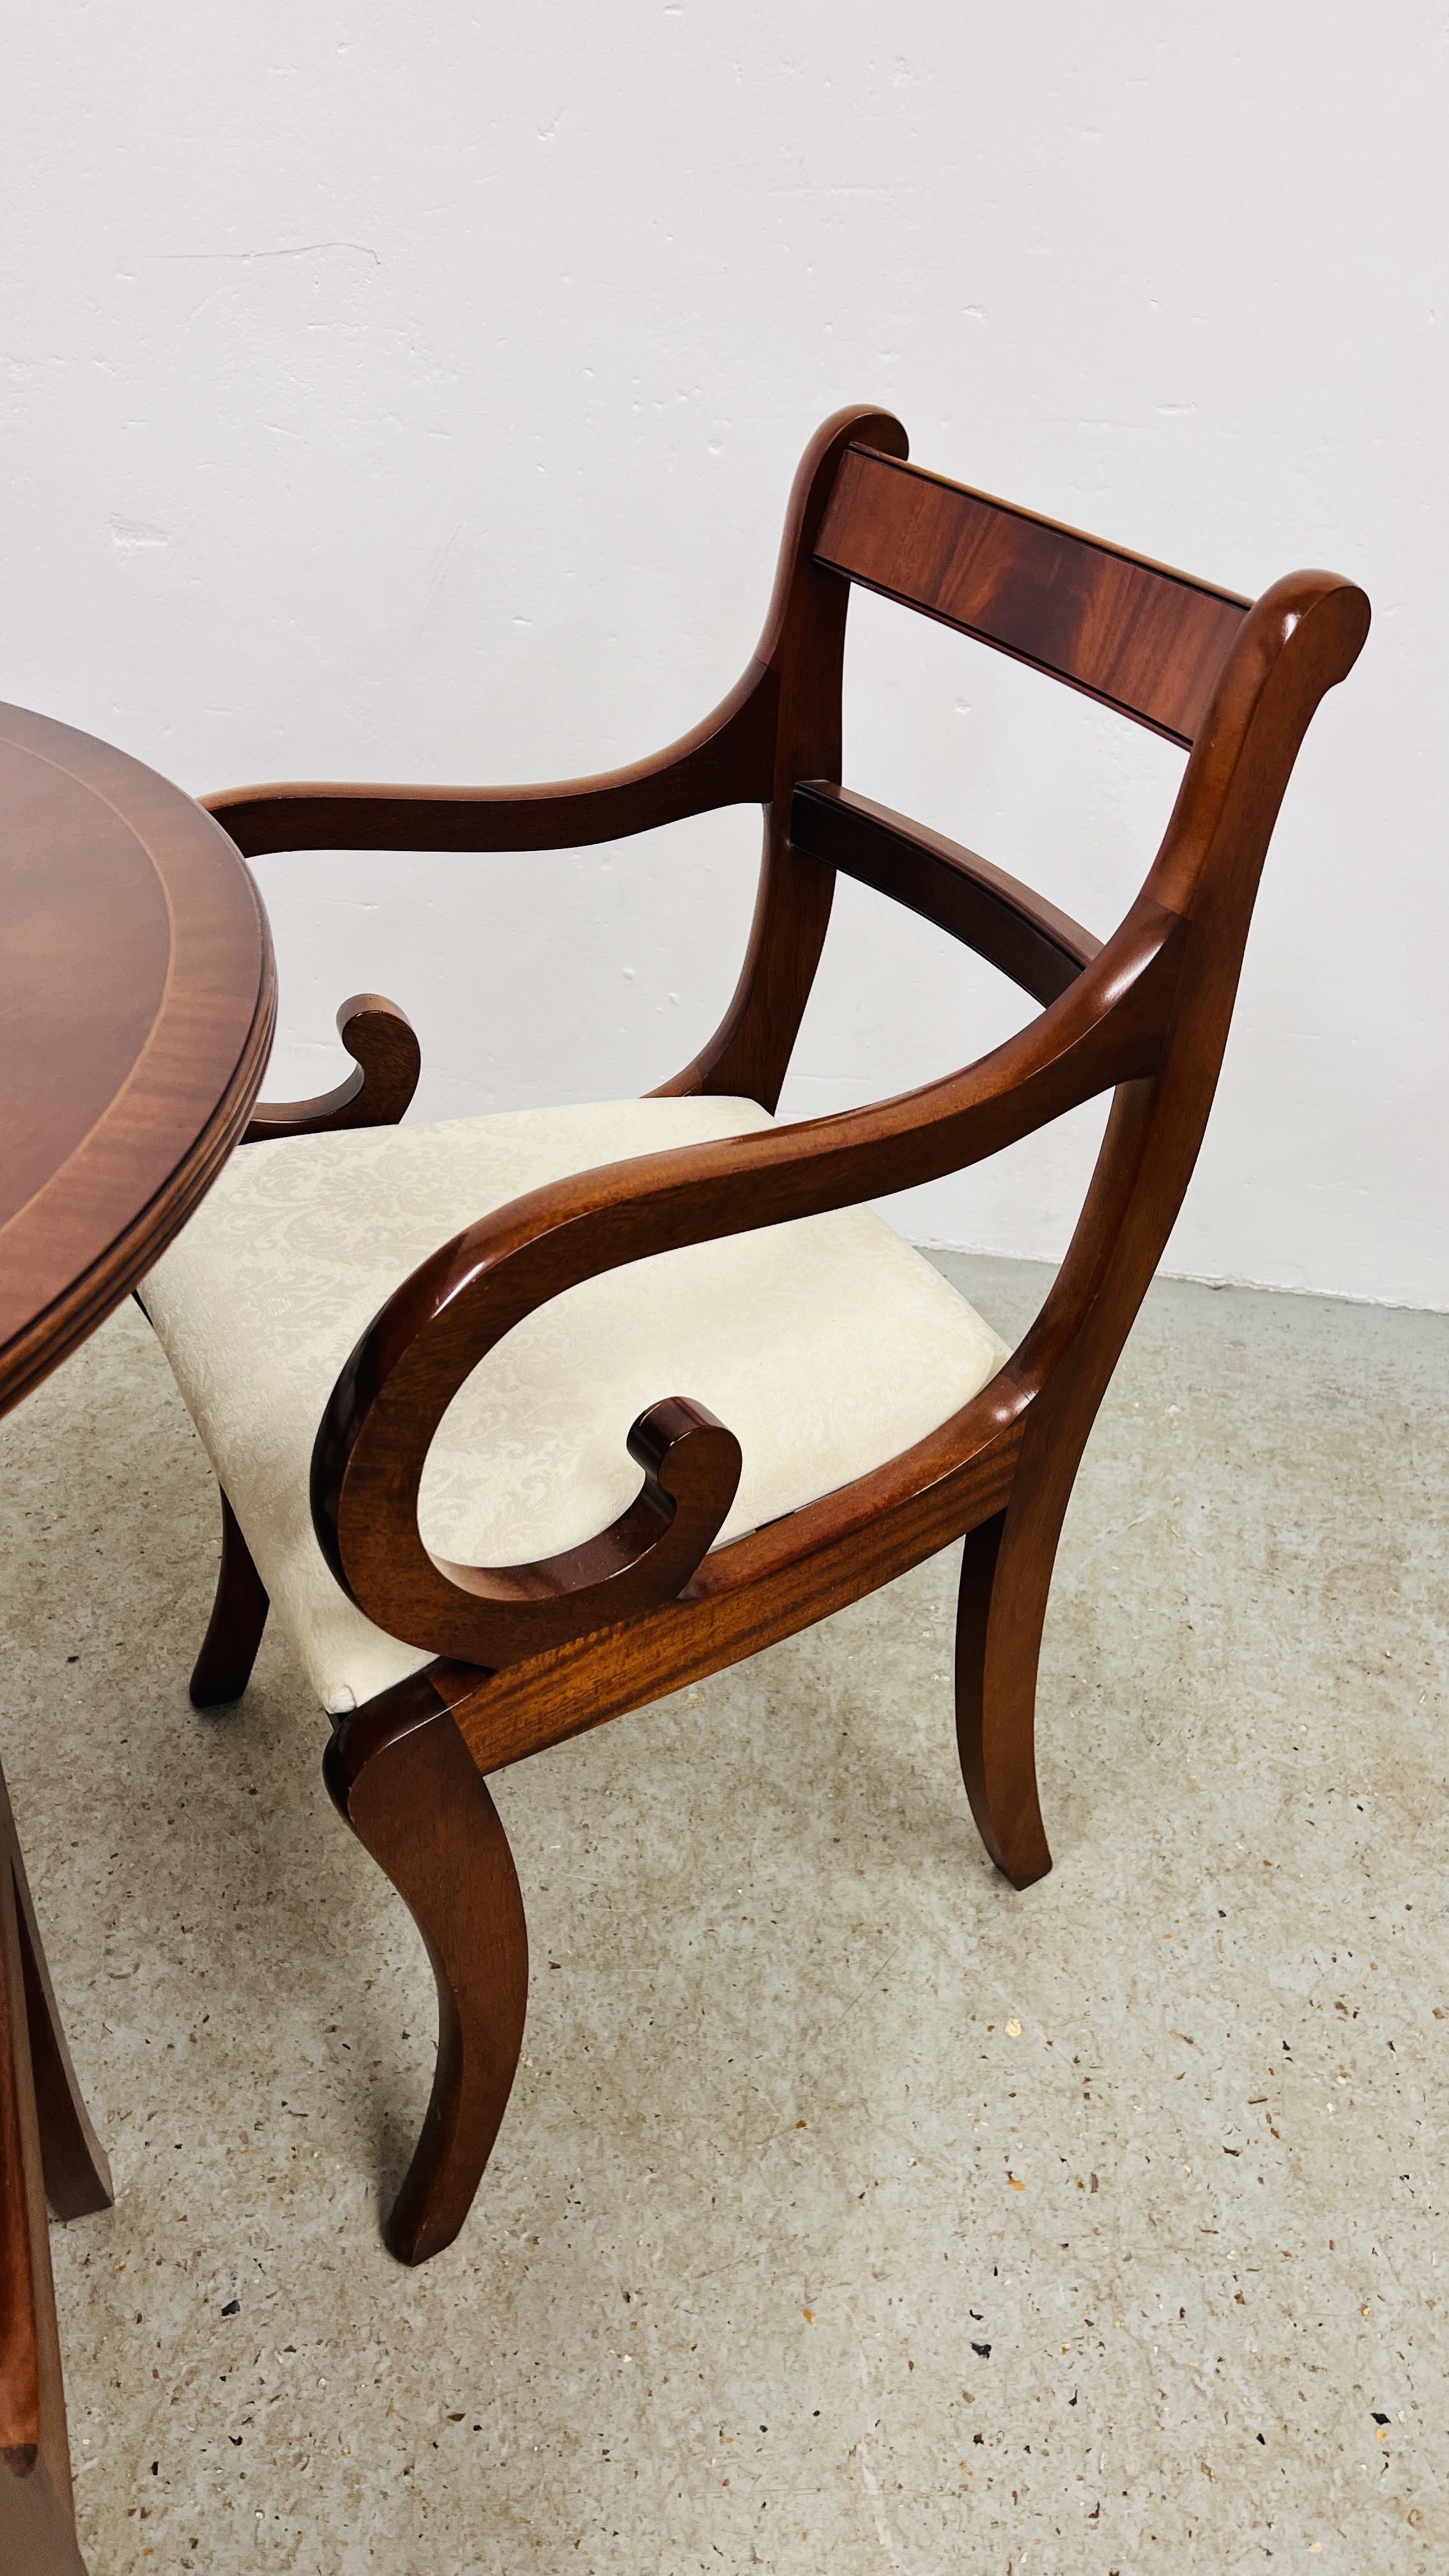 A REPRODUCTION MAHOGANY FINISH EXTENDING DROP LEAF DINING TABLE ALONG WITH 4 MATCHING CHAIRS AND 2 - Image 3 of 8